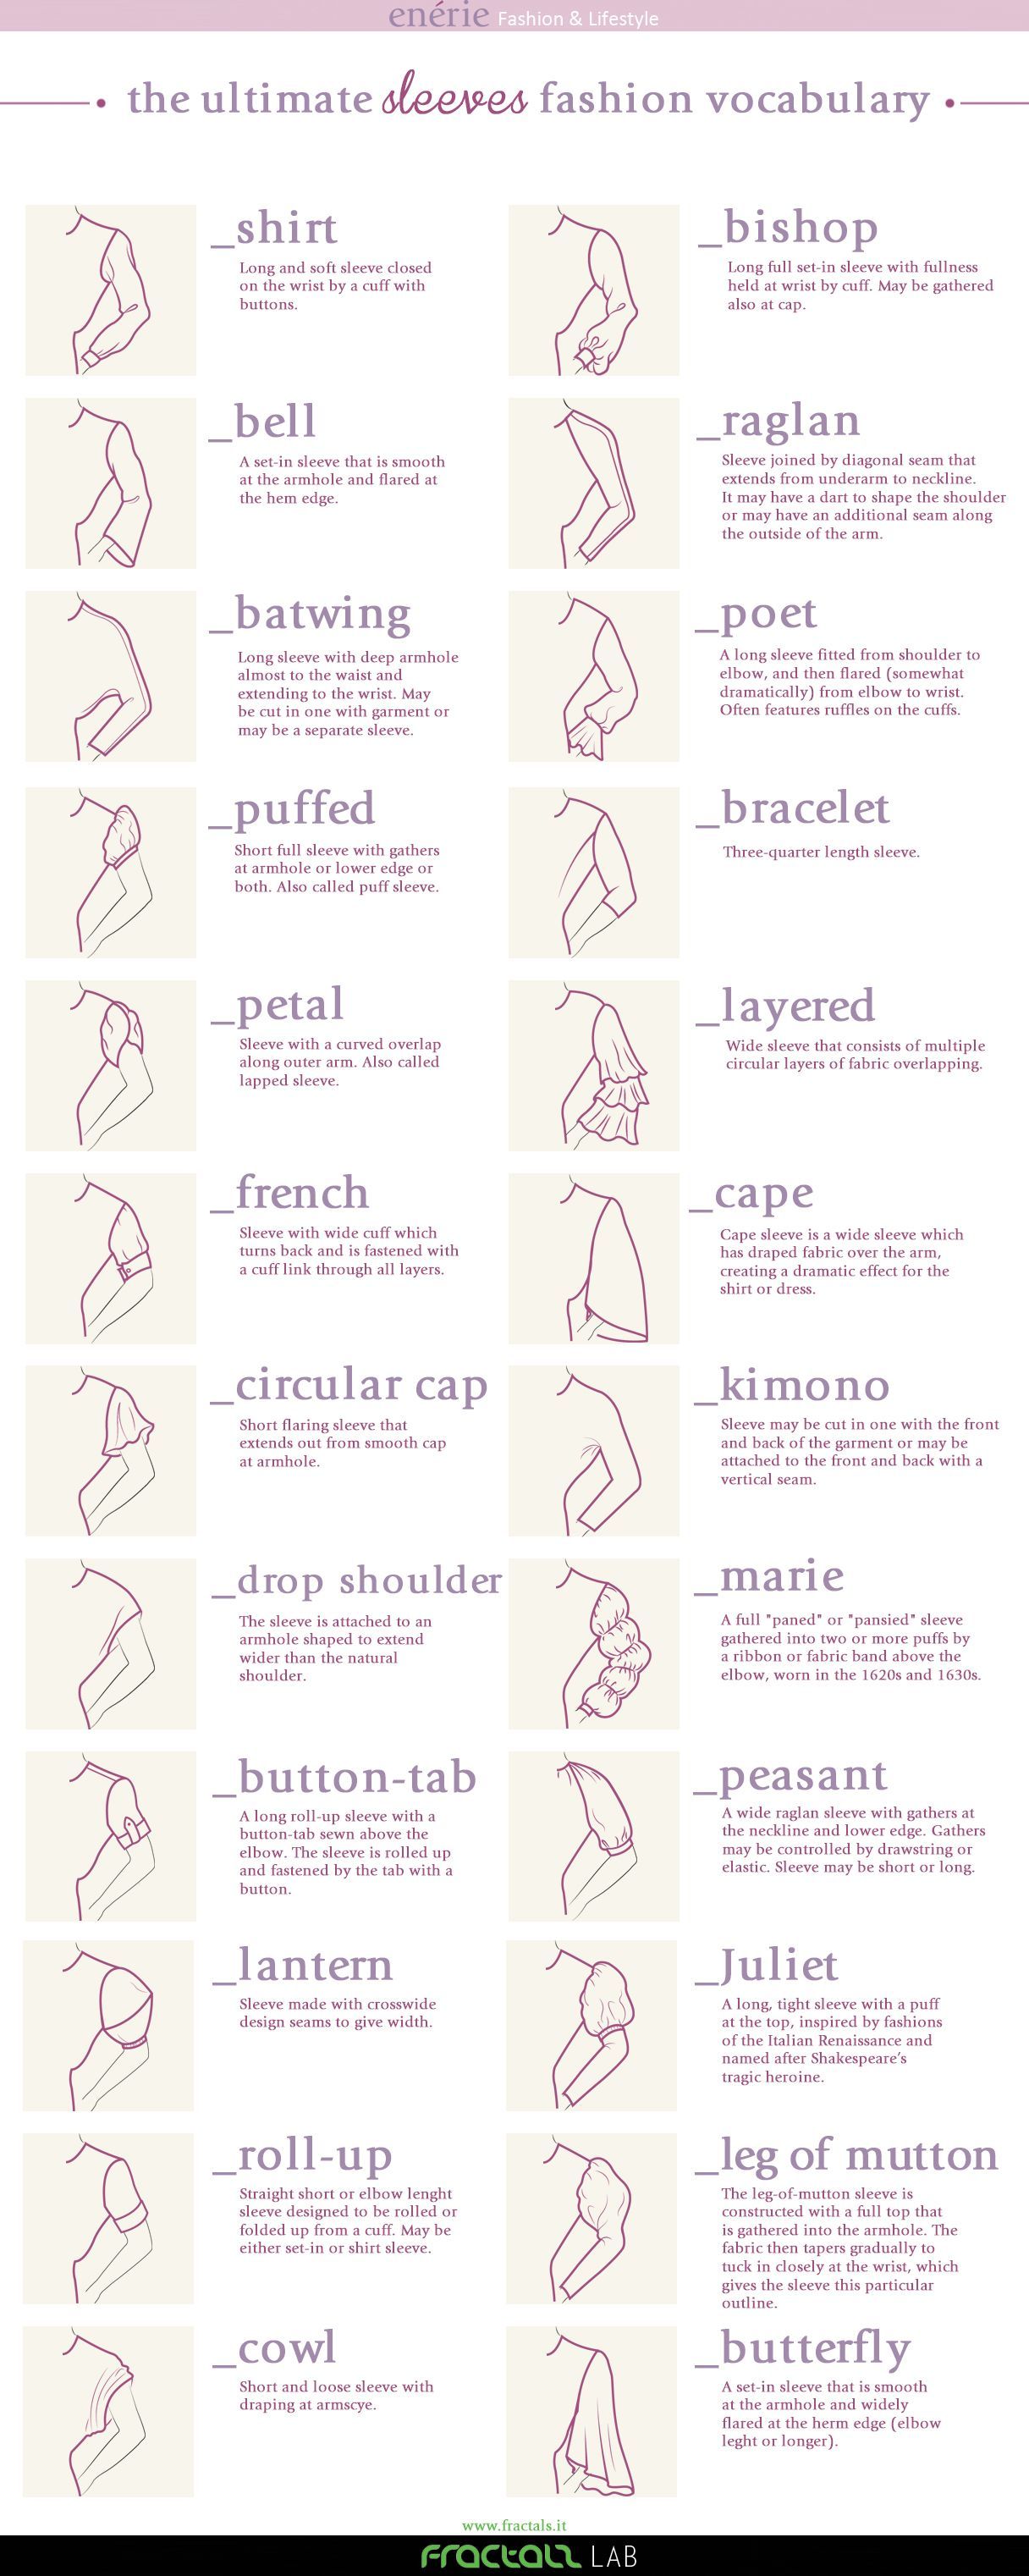 The Ultimate Sleeves Fashion Vocabulary